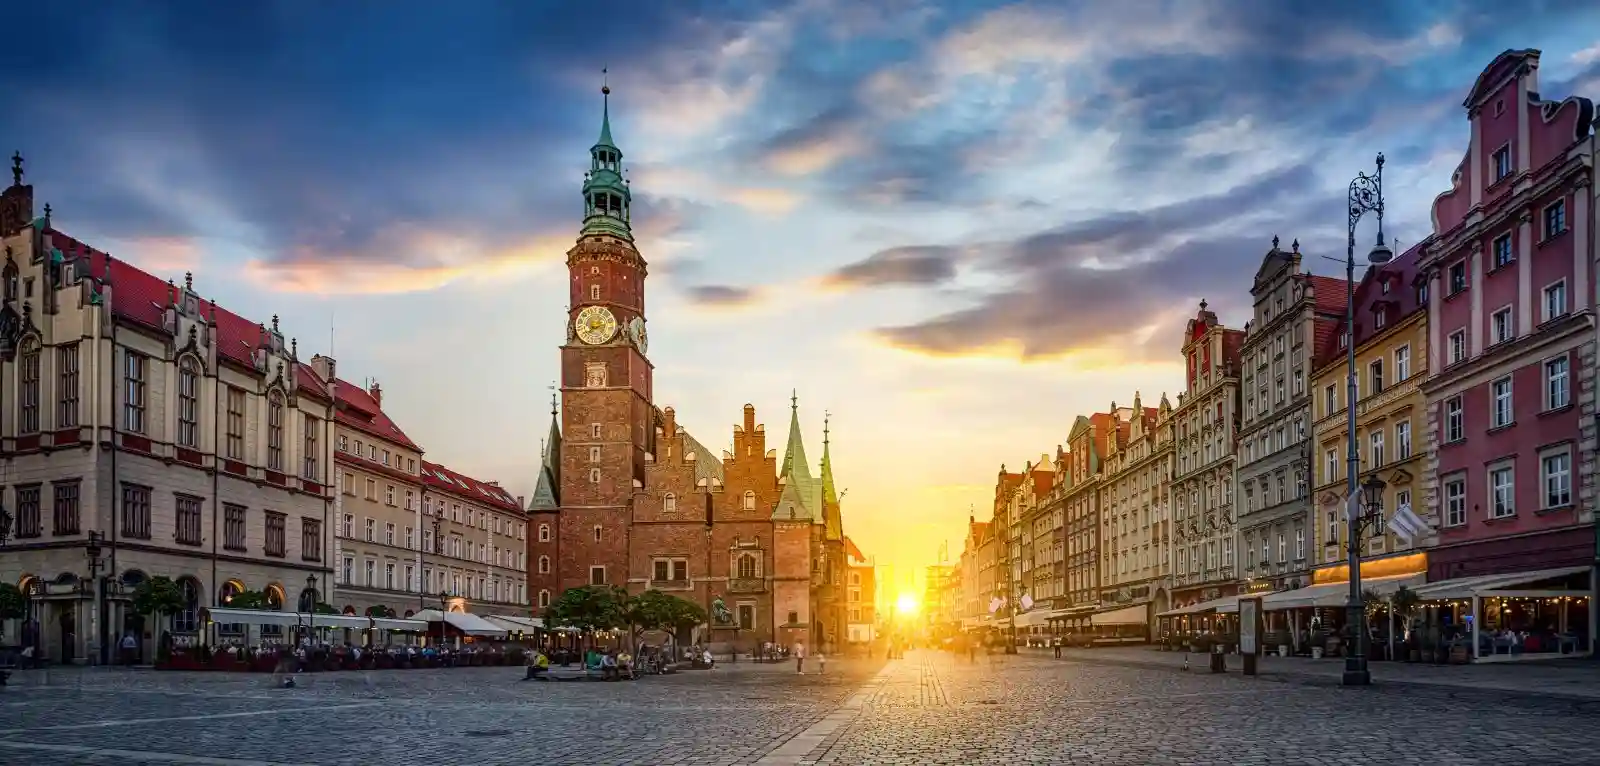 Wandering Wroclaw Poland A Stroll Through Time and Beauty image